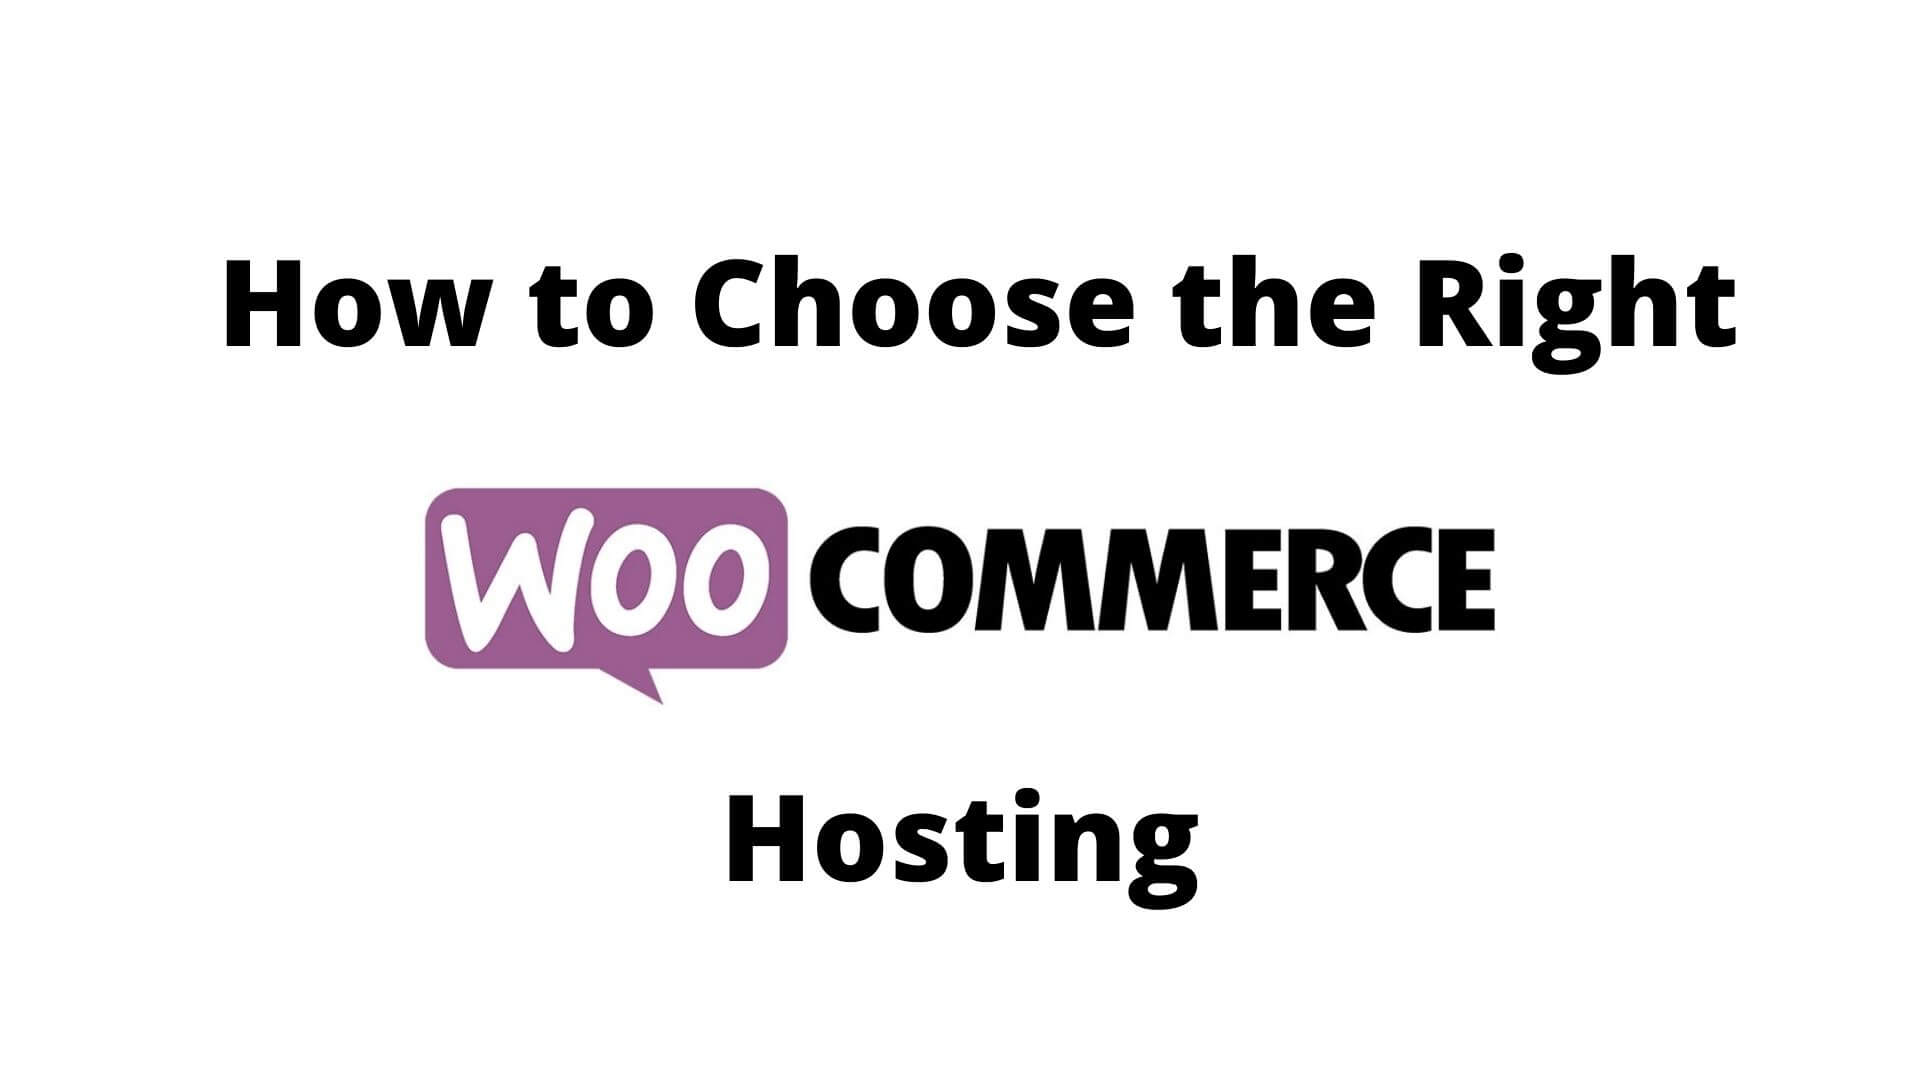 How-to-Choose-the-Right-WooCommerce-Hosting-1